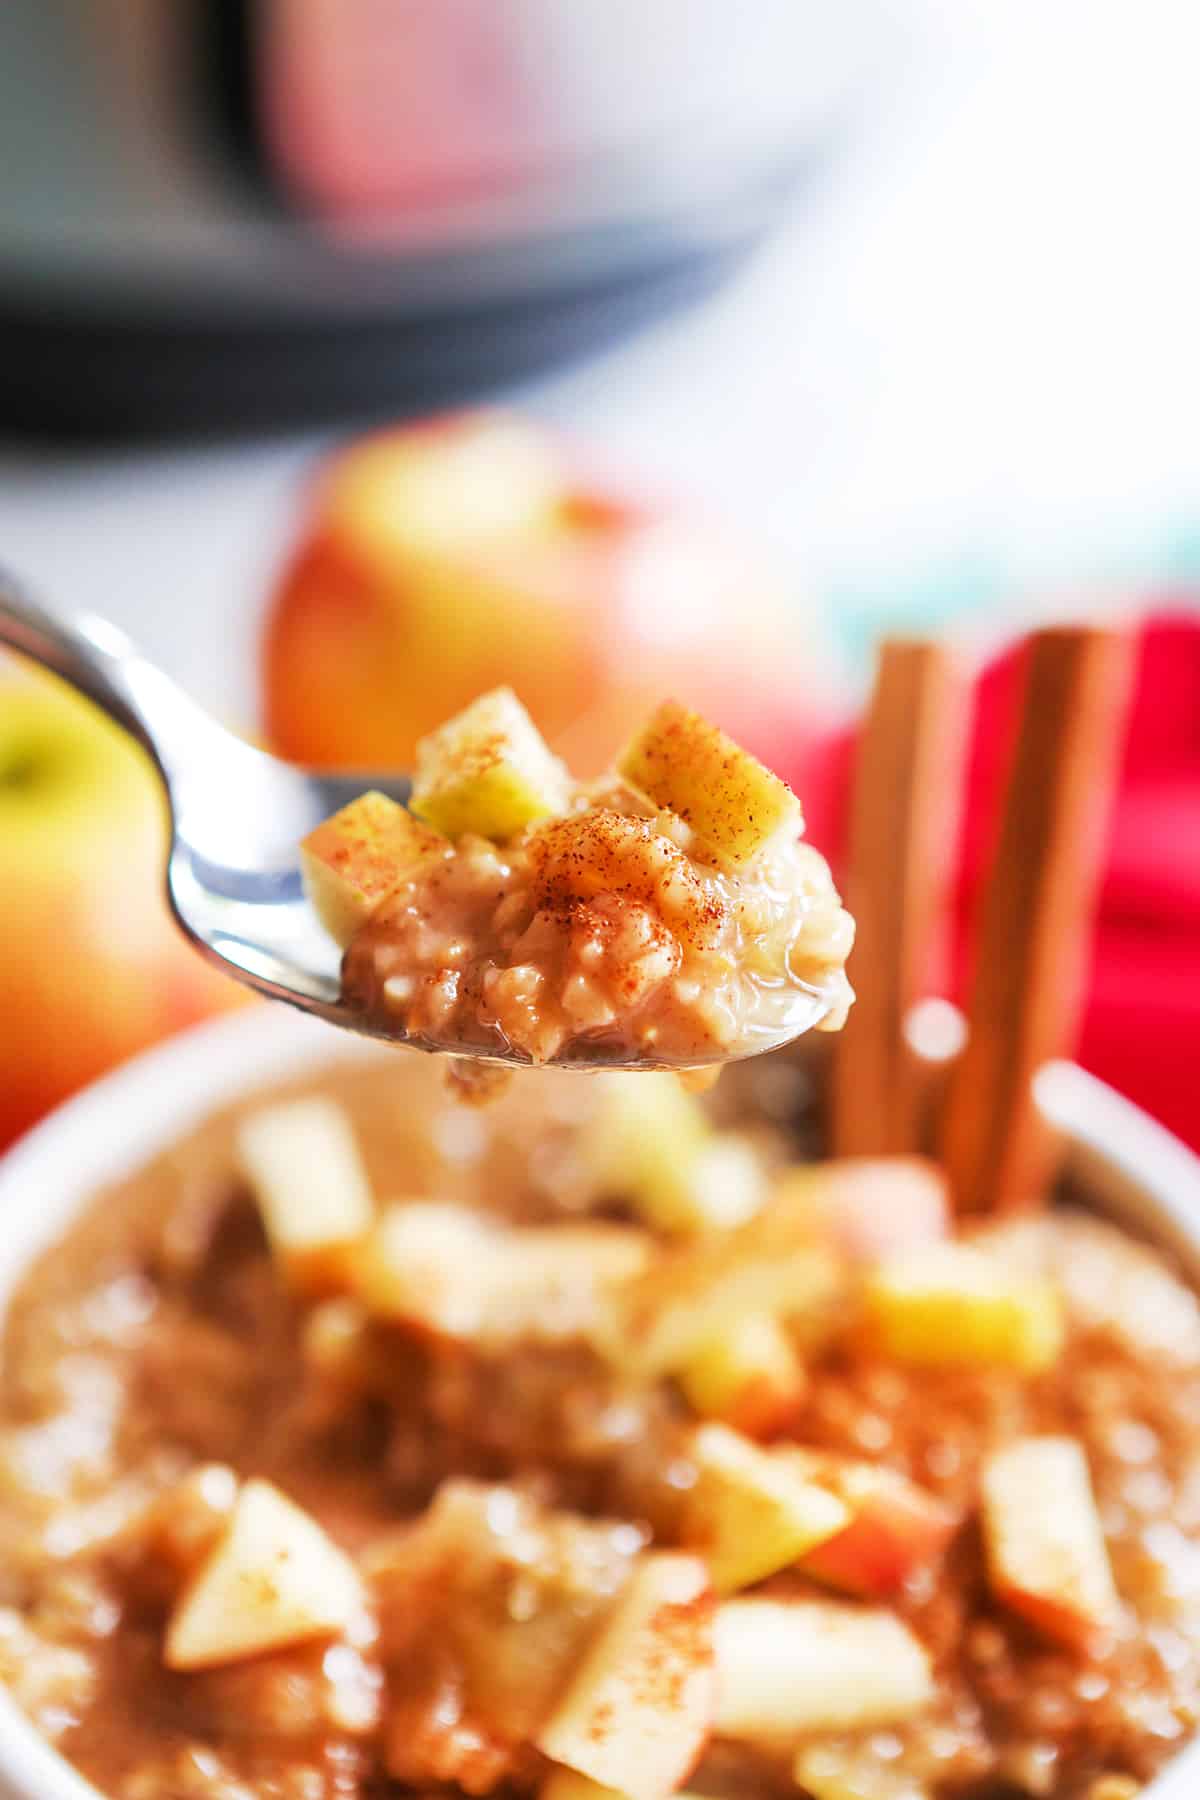 Spoon full of instant pot apple oatmeal in front of the bowl.